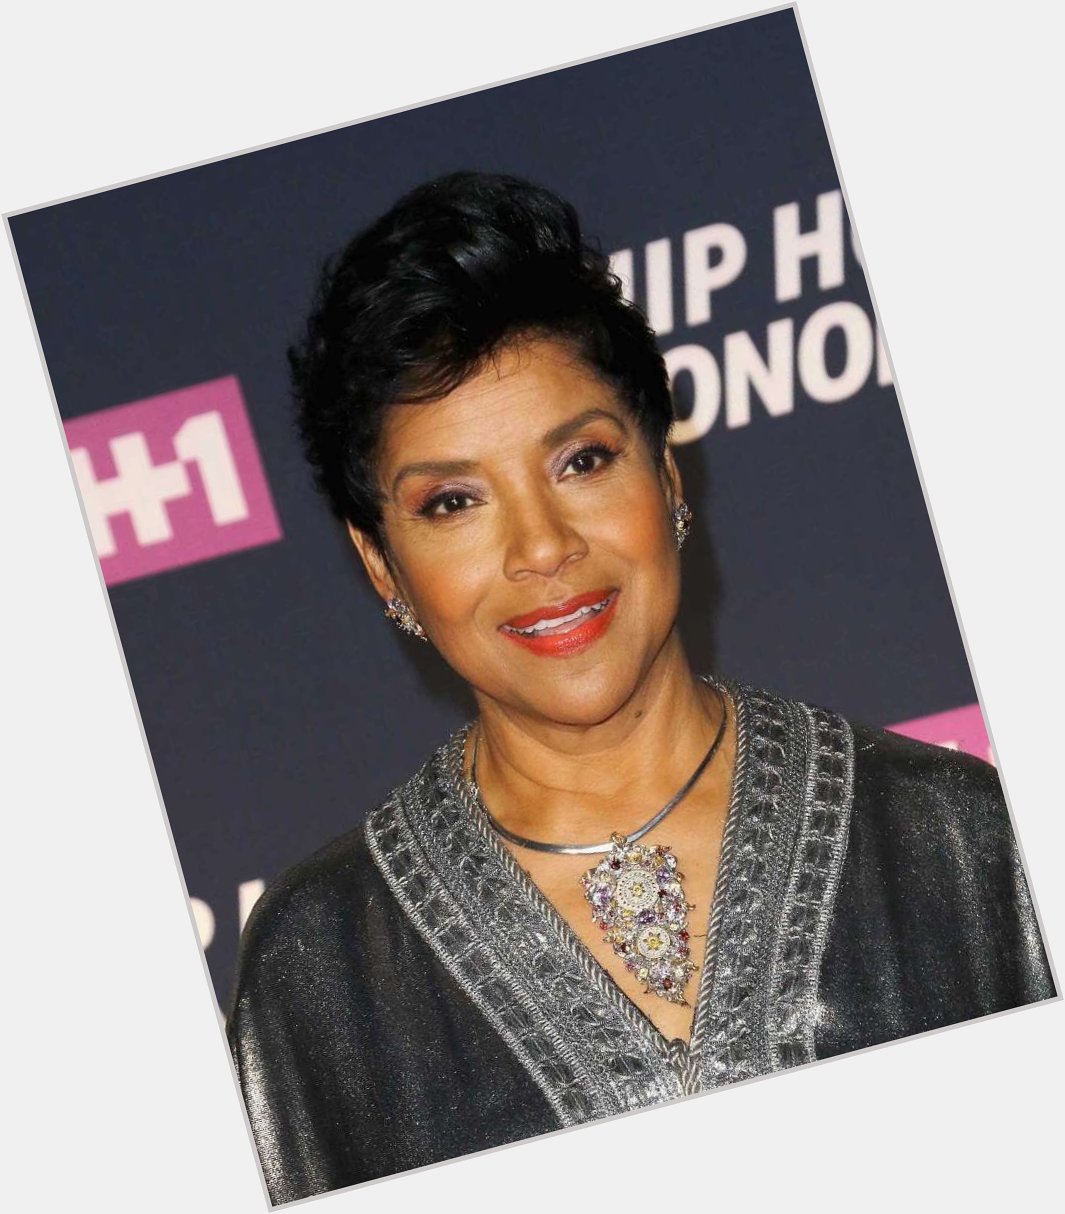 Wishing a happy birthday to Phylicia Rashad, a legendary icon and inspiration!  